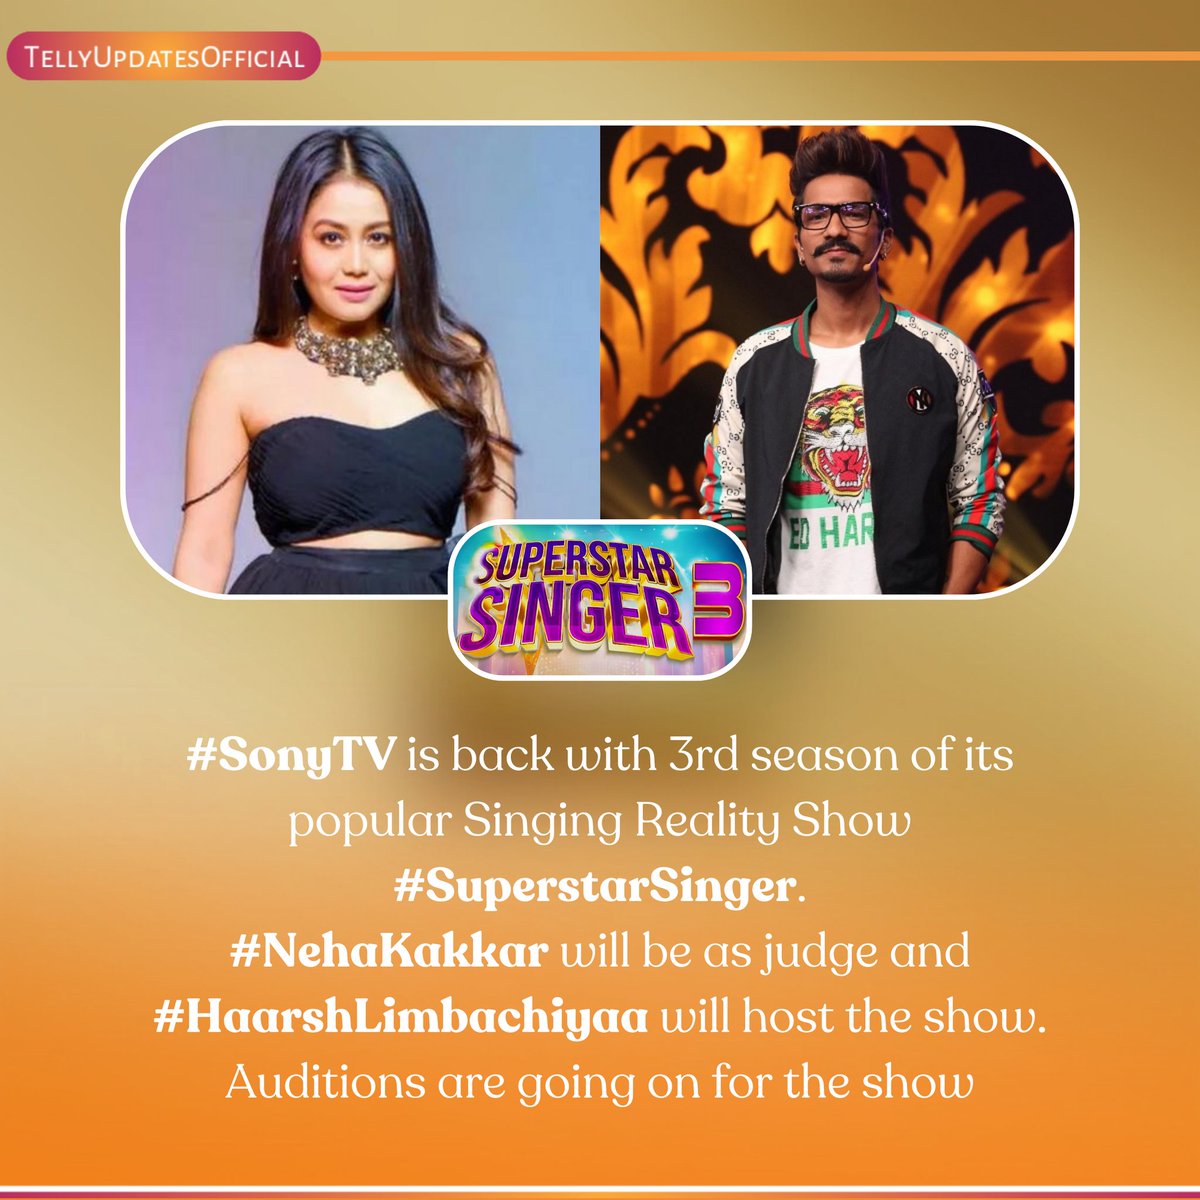 #SuperExclusive BREAKING NEWS @SonyTV is back with 3rd season of its popular Singing Reality Show #SuperstarSinger. #NehaKakkar will be as judge and #HaarshLimbachiyaa will host the show. Auditions are going on for the show. @TellyupdatesO #SuperstarSinger3 #SonyTV #NewShow